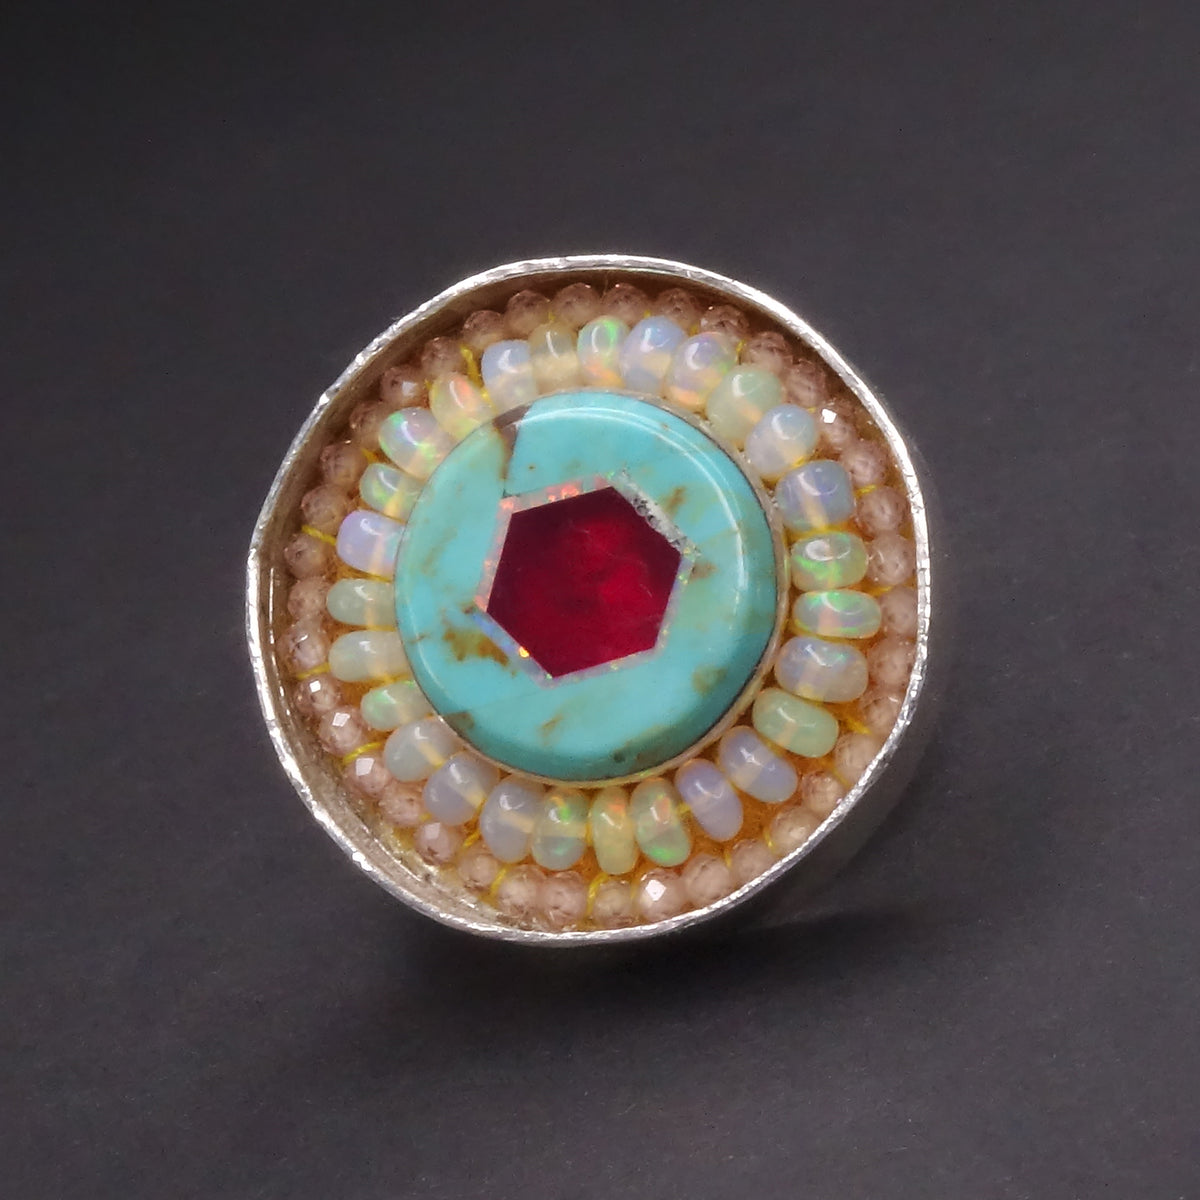 She Boogied at Mister Kelly's: opal, ruby, turquoise mosaic ring